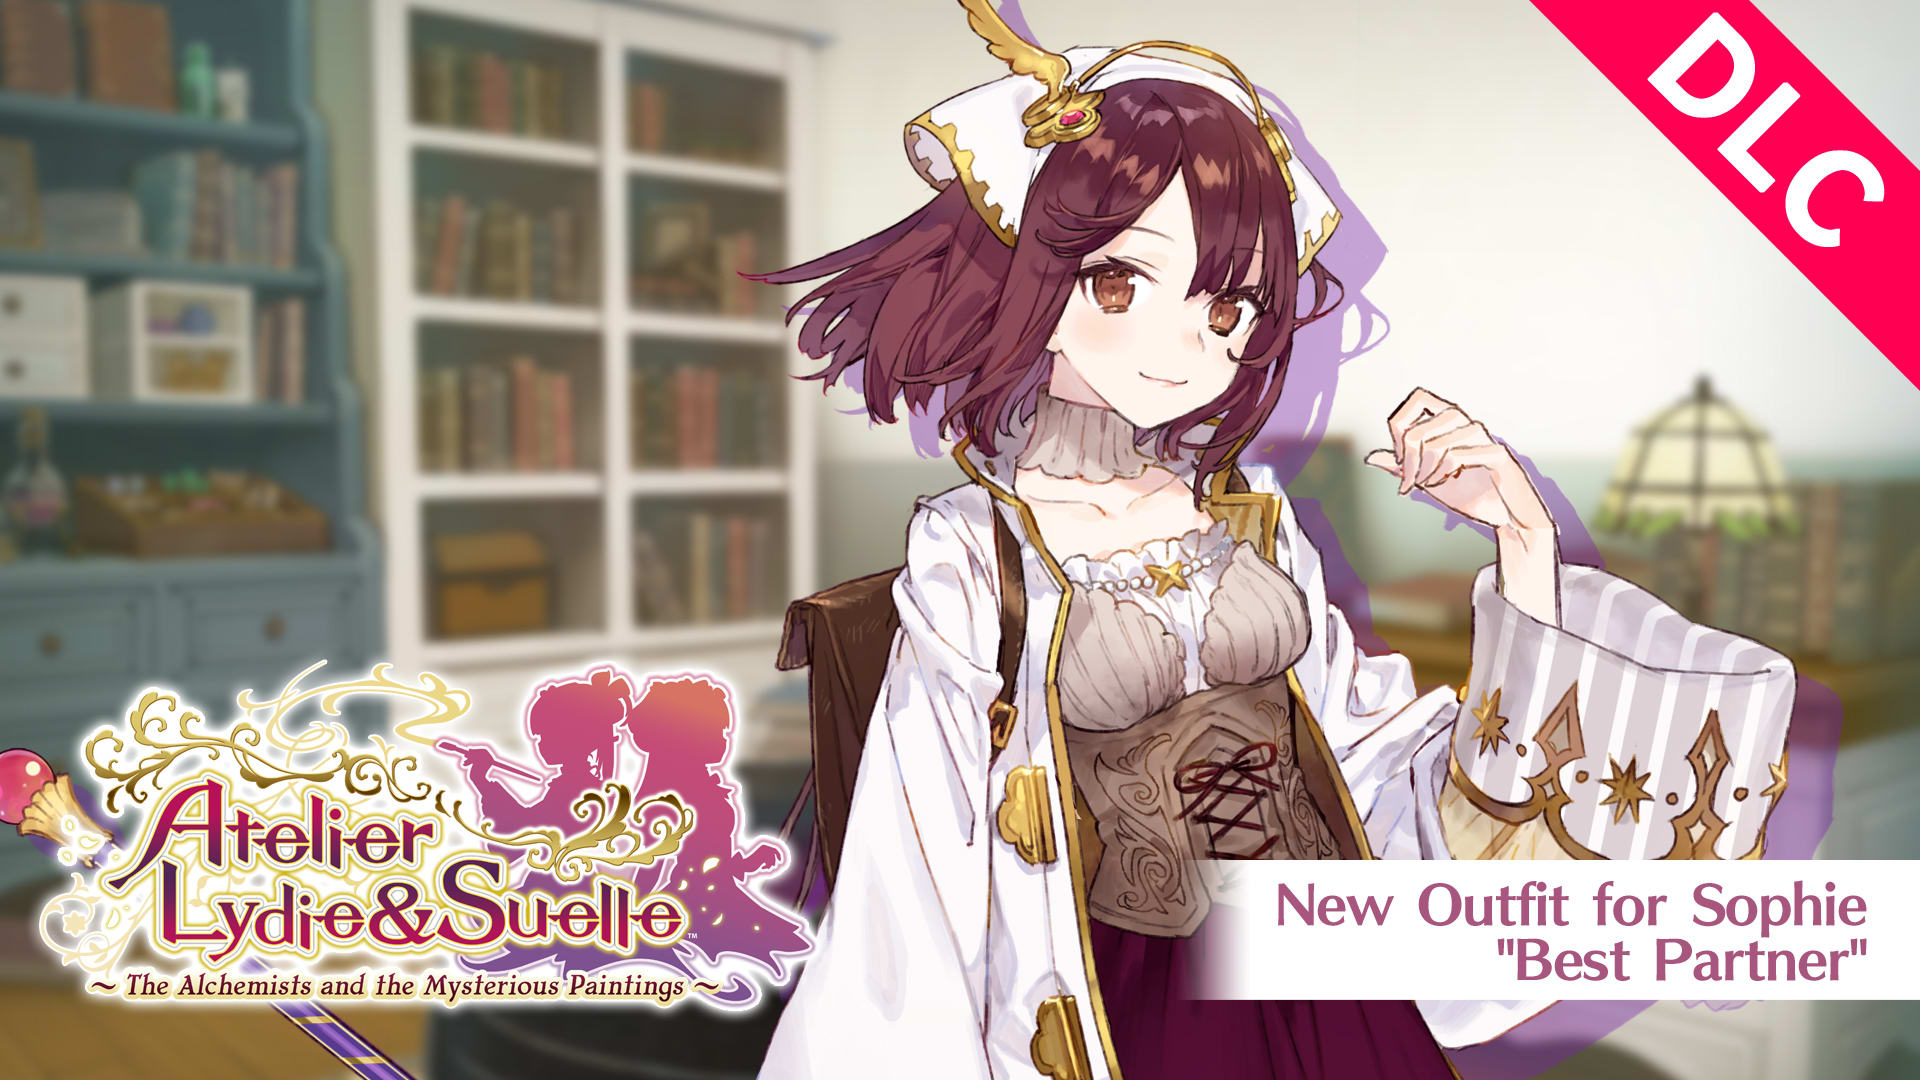 Atelier Lydie & Suelle: New Outfit for Sophie "Best Partner"